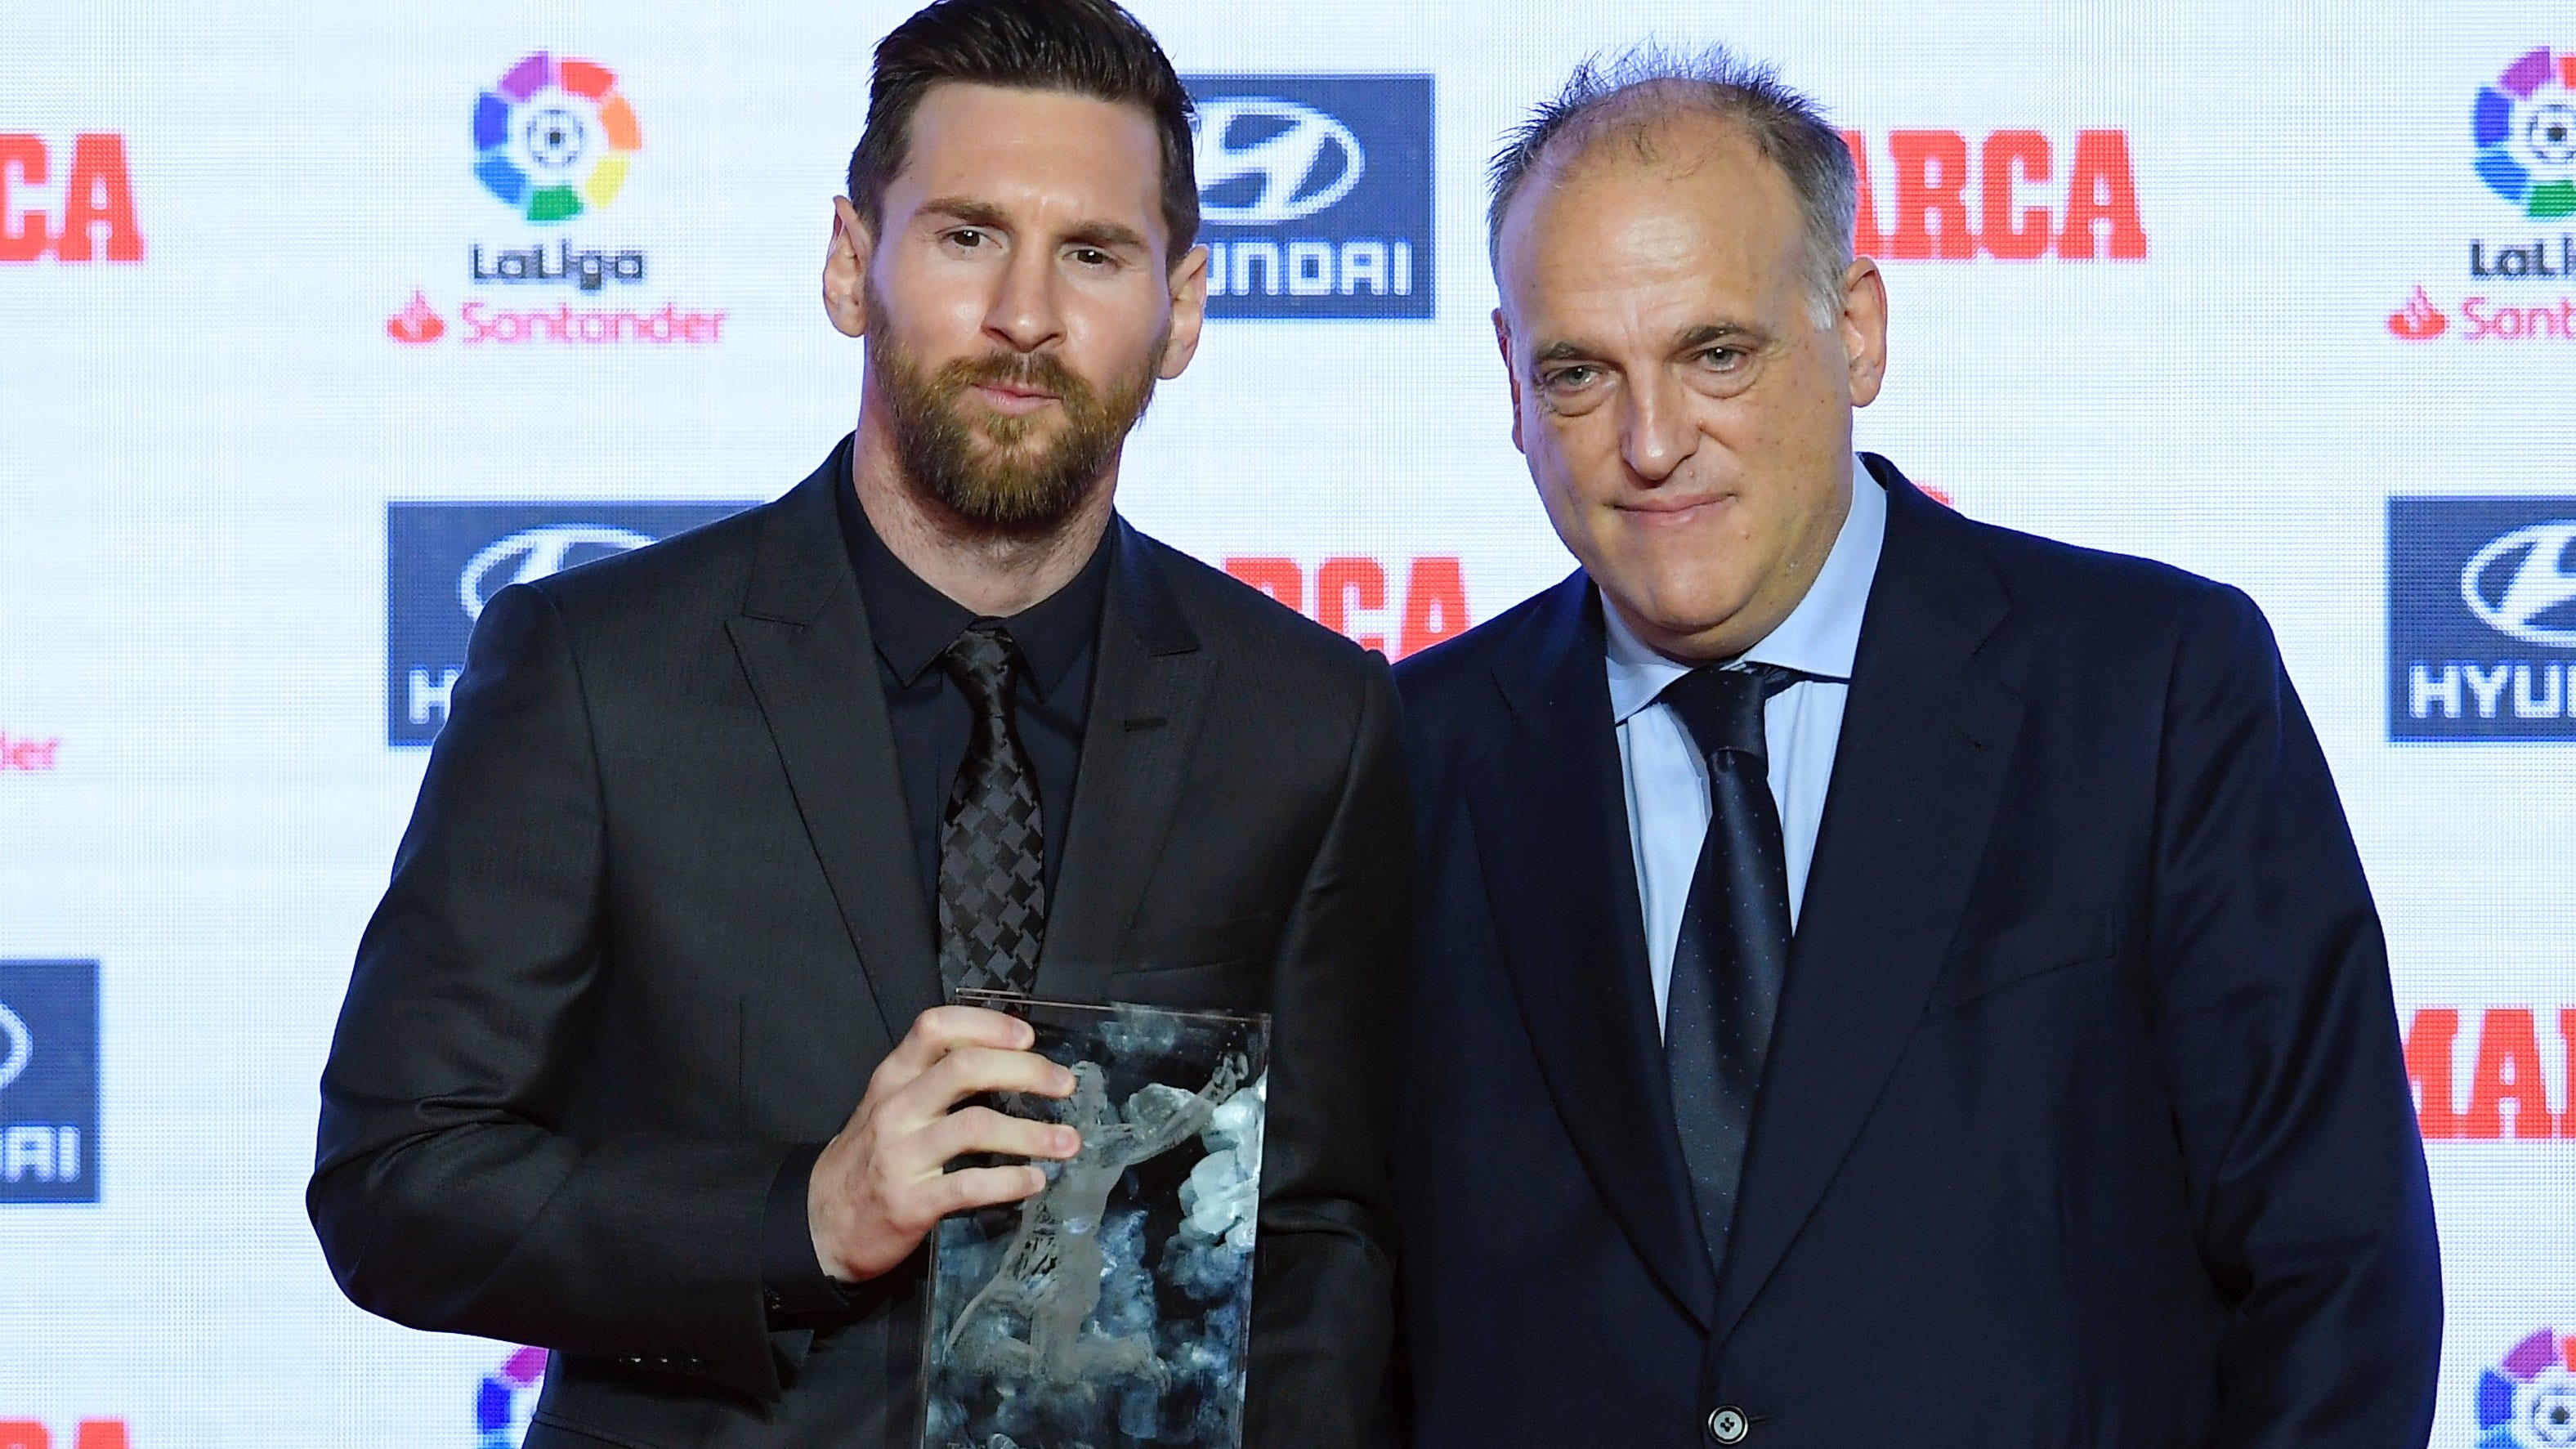 ‘Lionel Messi would have liked to retire at Barcelona’ – Inter Miami star’s return to Catalonia was ‘close’, says La Liga president Javier Tebas, before eventual move to MLS | Goal.com US